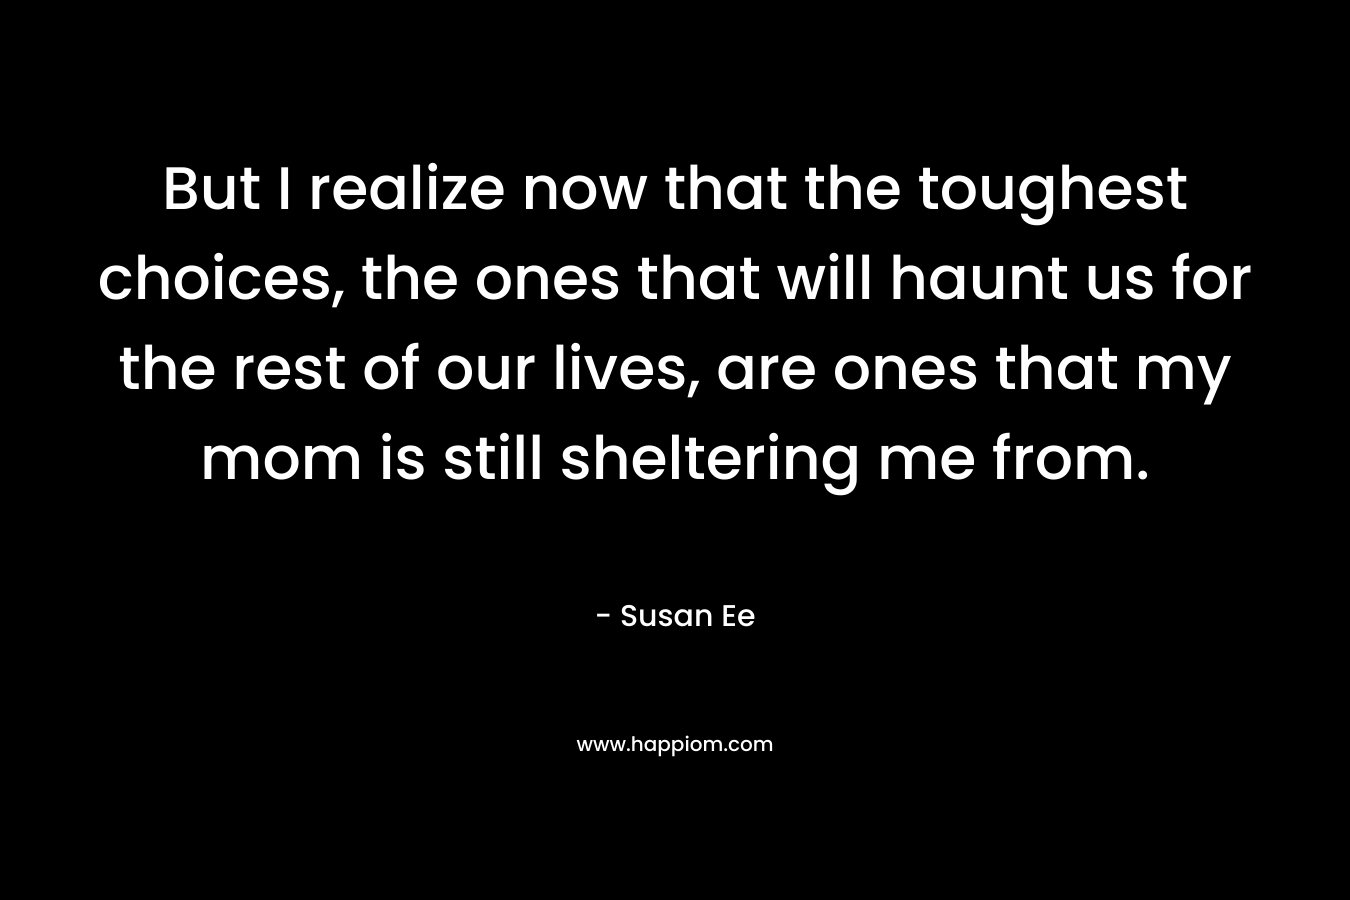 But I realize now that the toughest choices, the ones that will haunt us for the rest of our lives, are ones that my mom is still sheltering me from. – Susan Ee